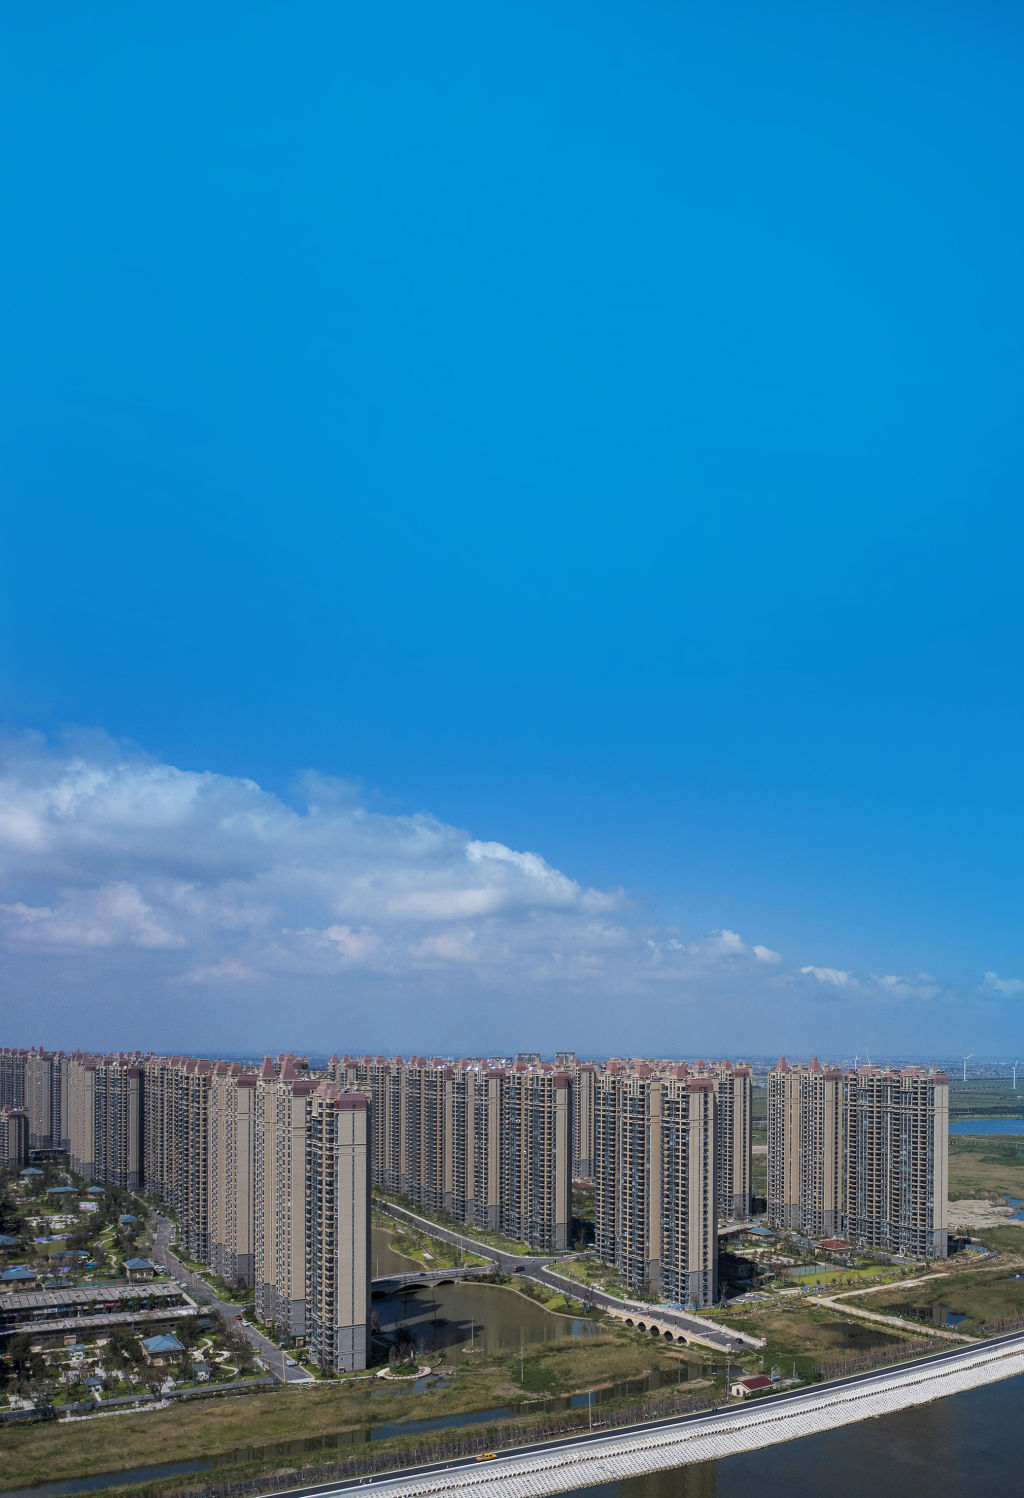 Apartment buildings at China Evergrande Group's Life in Venice real estate and tourism development in Qidong, Jiangsu province, China in 2021, at the time the company was on the brink of default. Photo: Qilai Shen